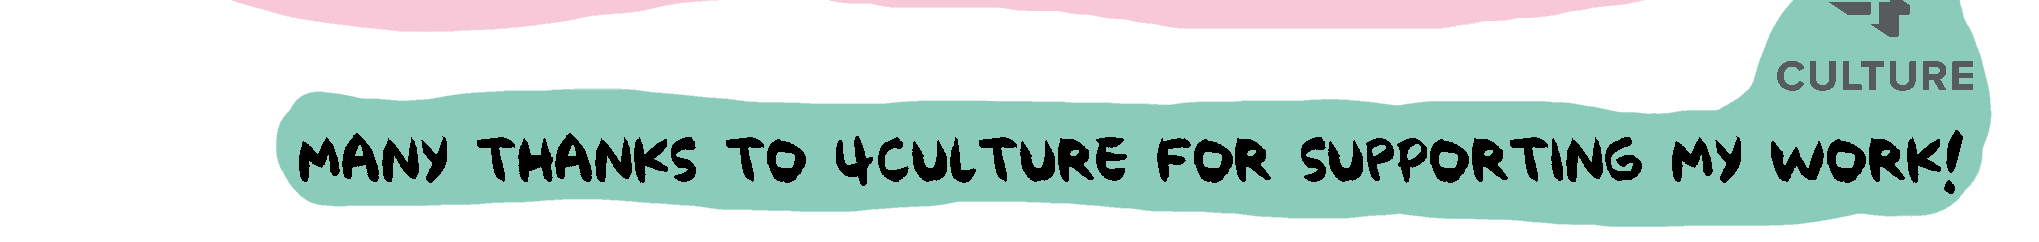 Thanks to 4Culture for supporting my work.